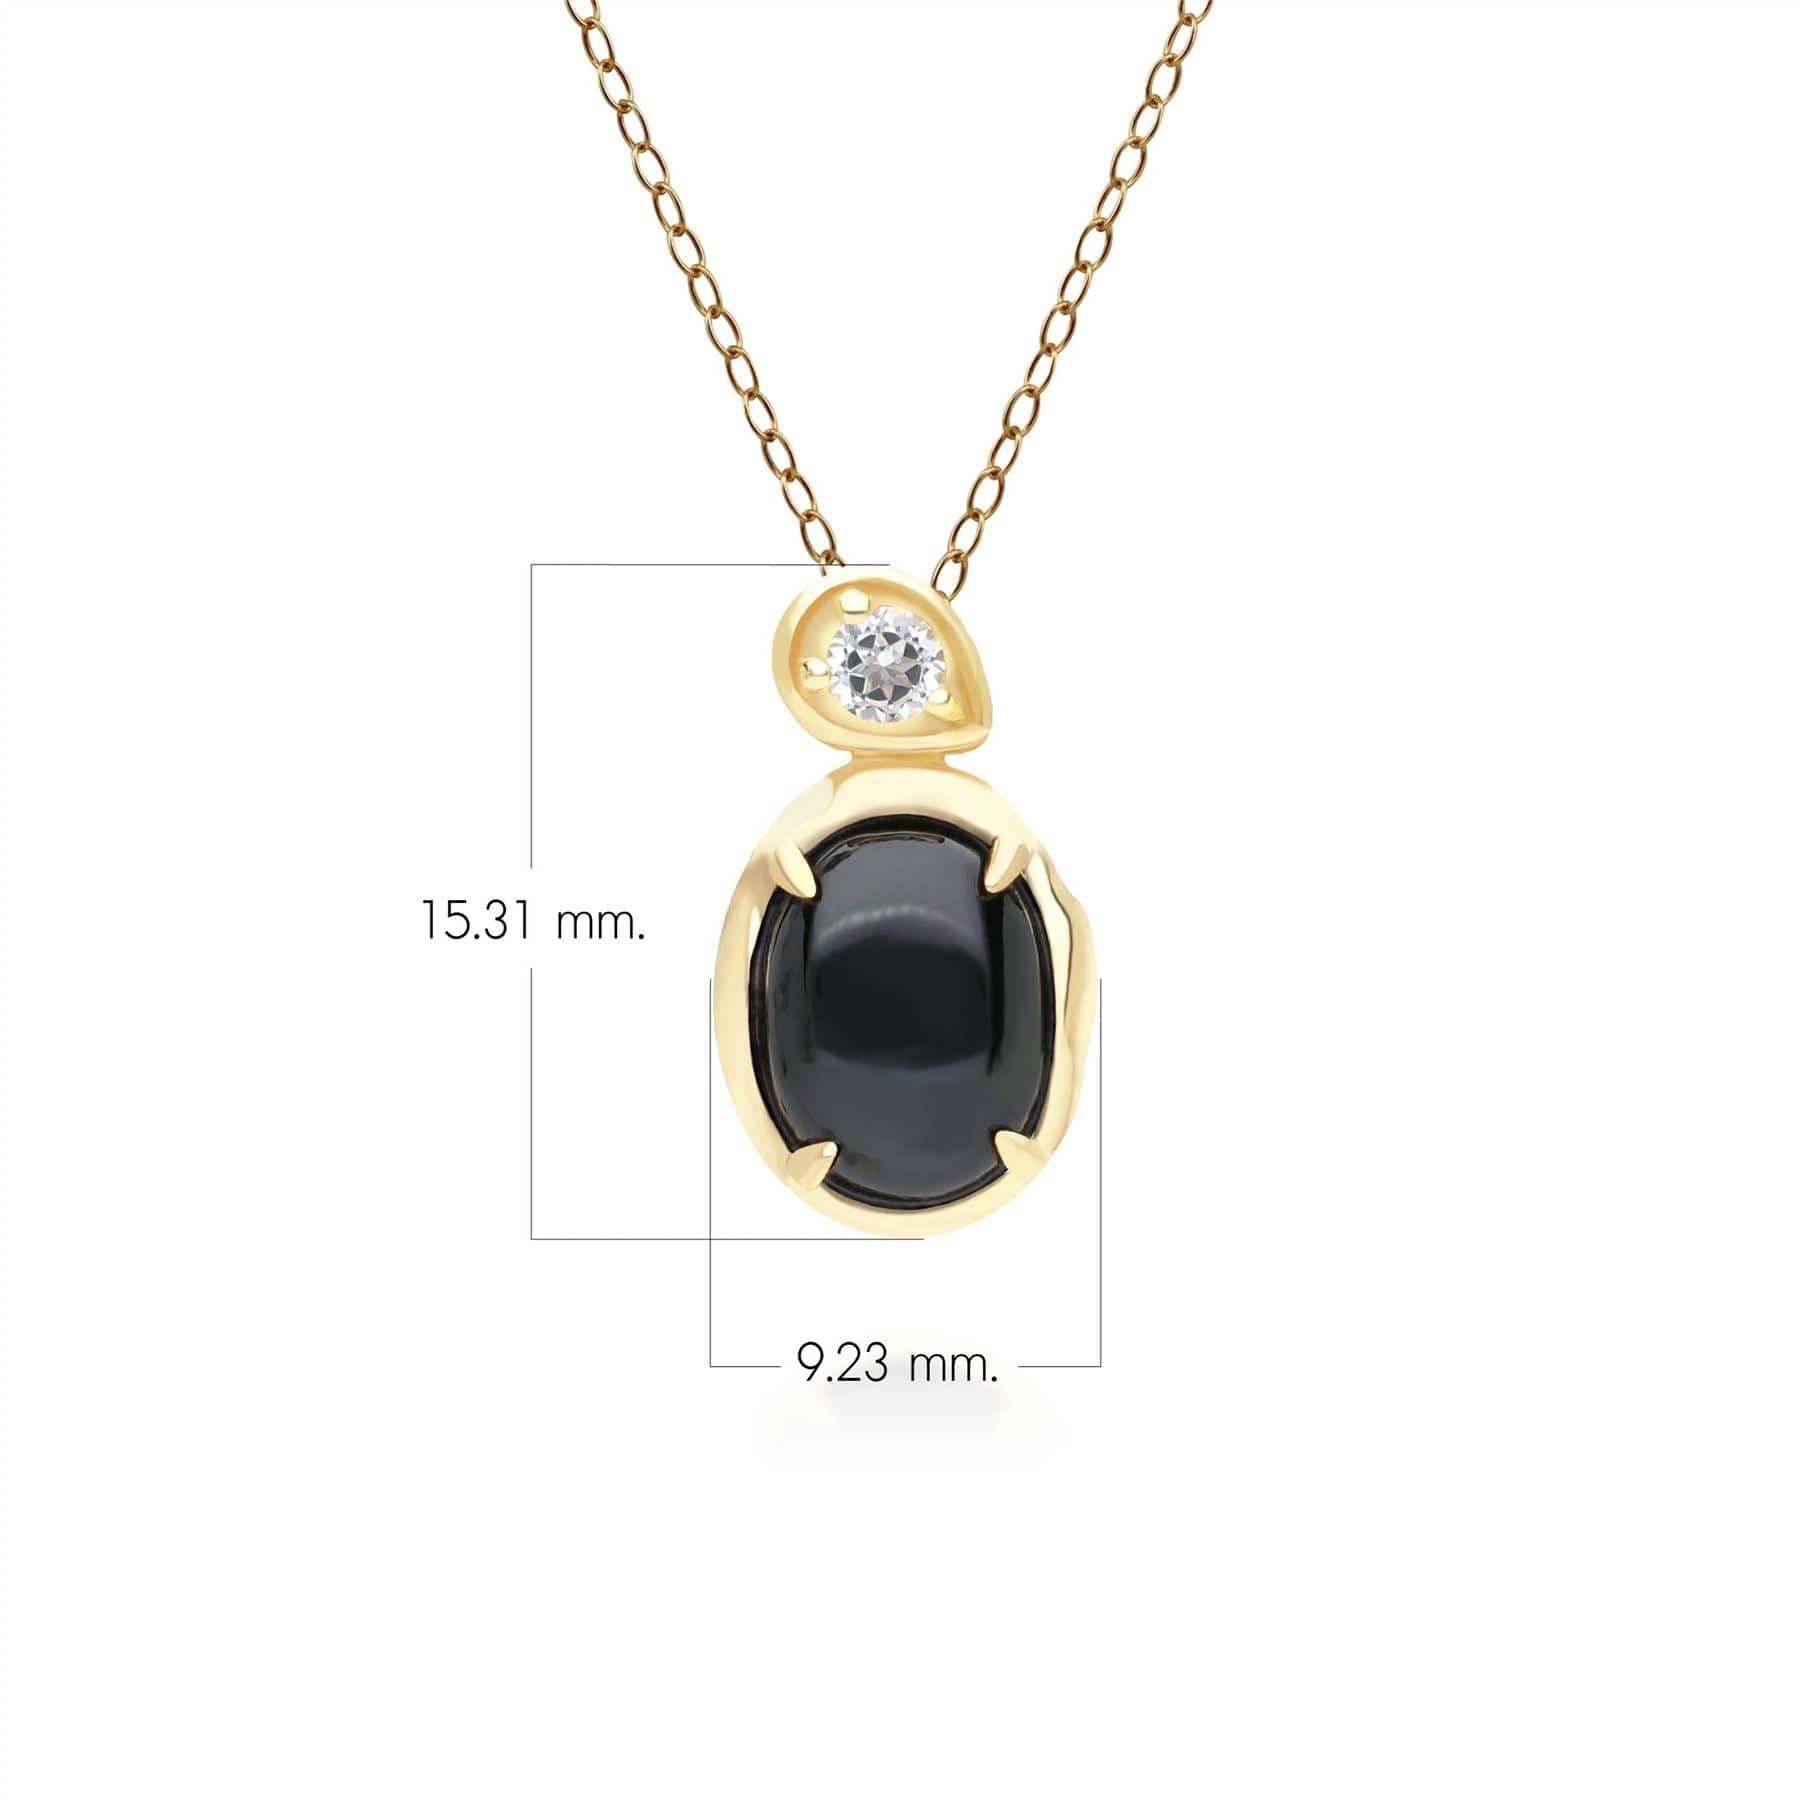 Irregular Oval Black Onyx & Topaz Pendant In 18ct Gold Plated SterlIng Silver